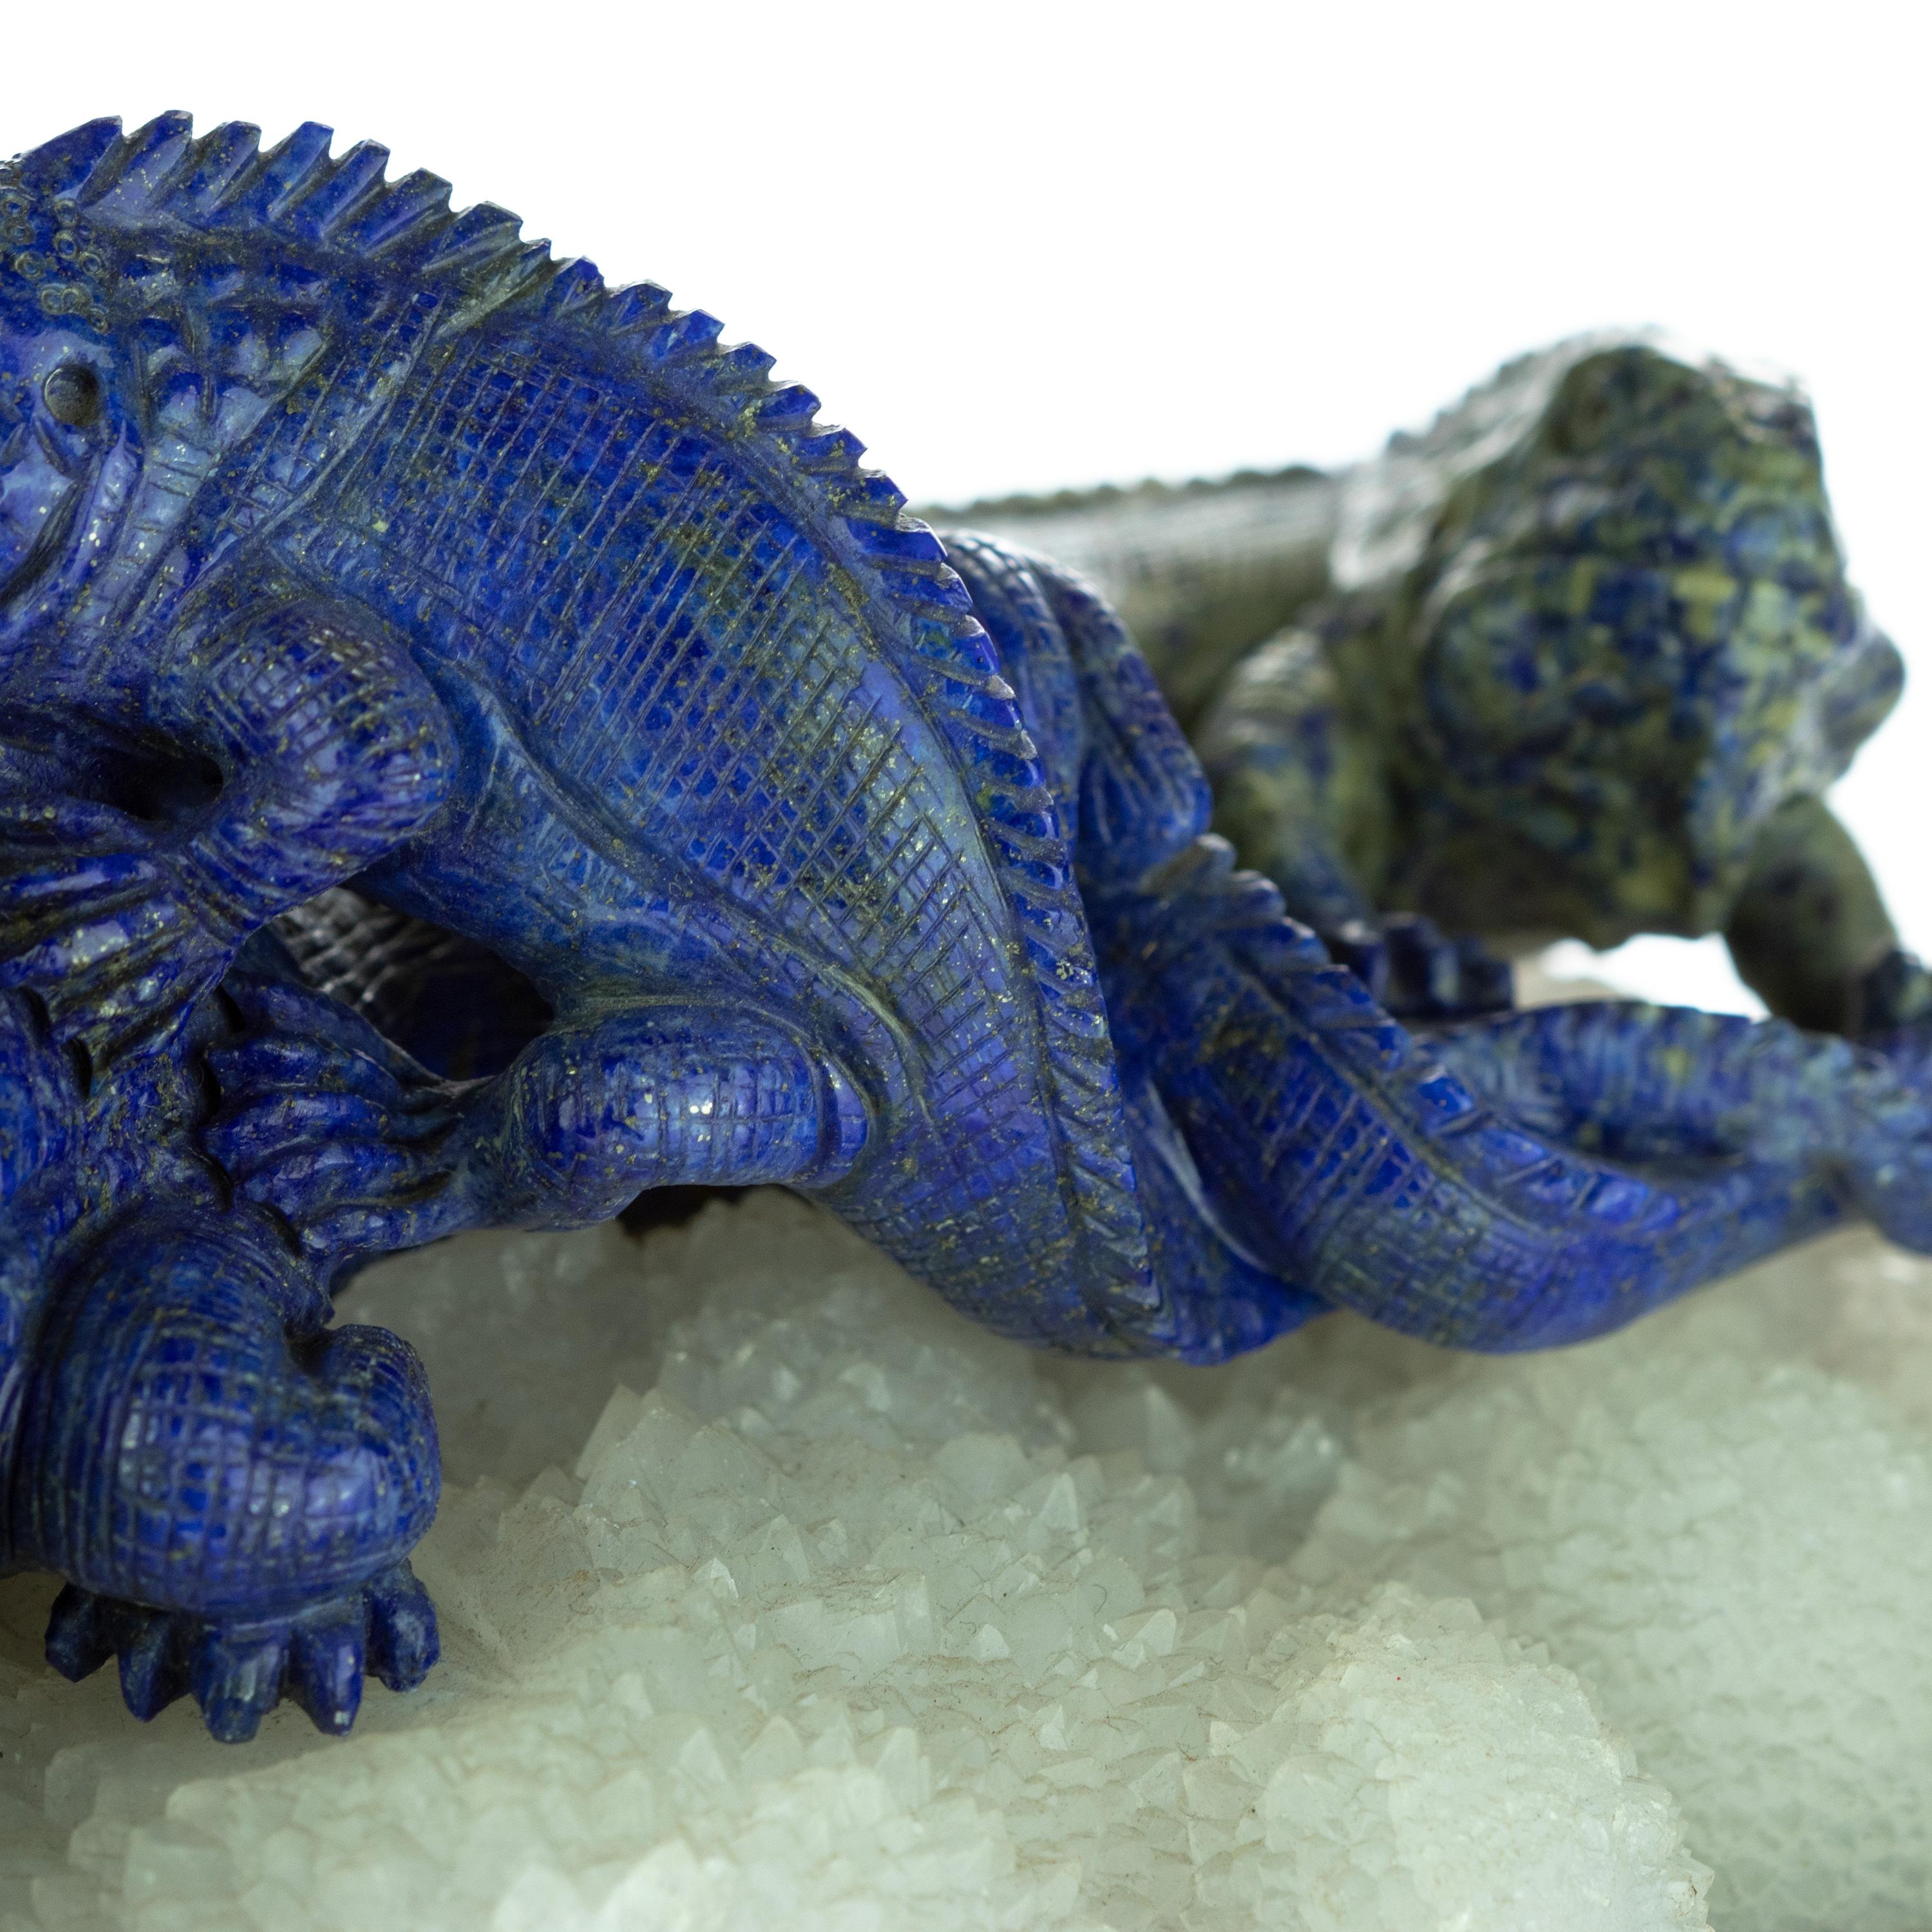 Lapis Lazuli Blue Lizards Figurine Carved Animal Artisanal Statue Sculpture In Excellent Condition For Sale In Milano, IT